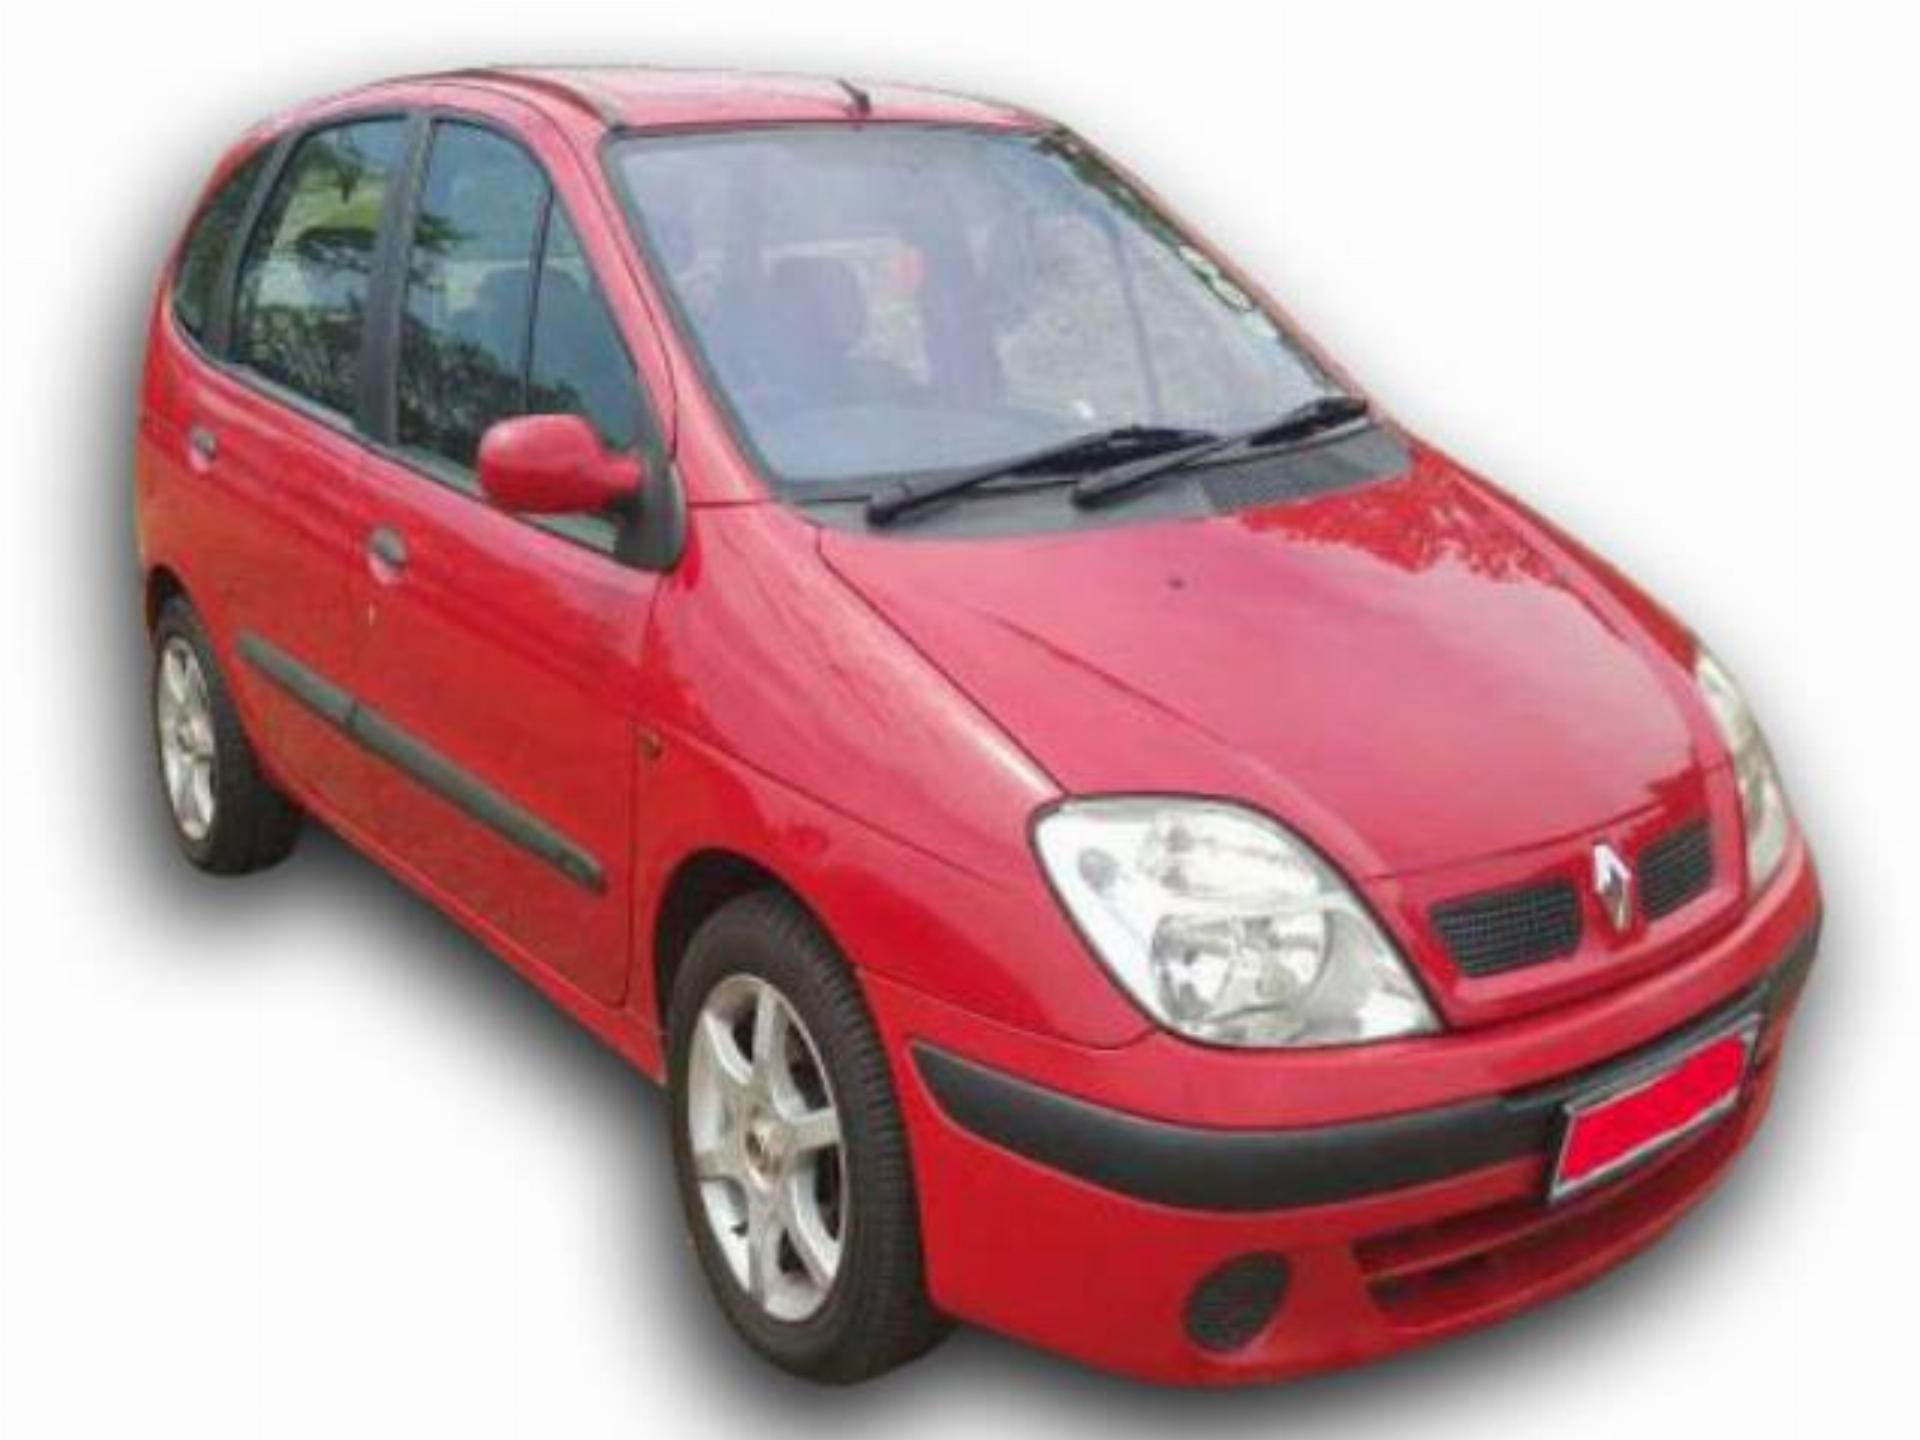 Used Renault Scenic 1.6 Rxe 2001 on auction PV1013974